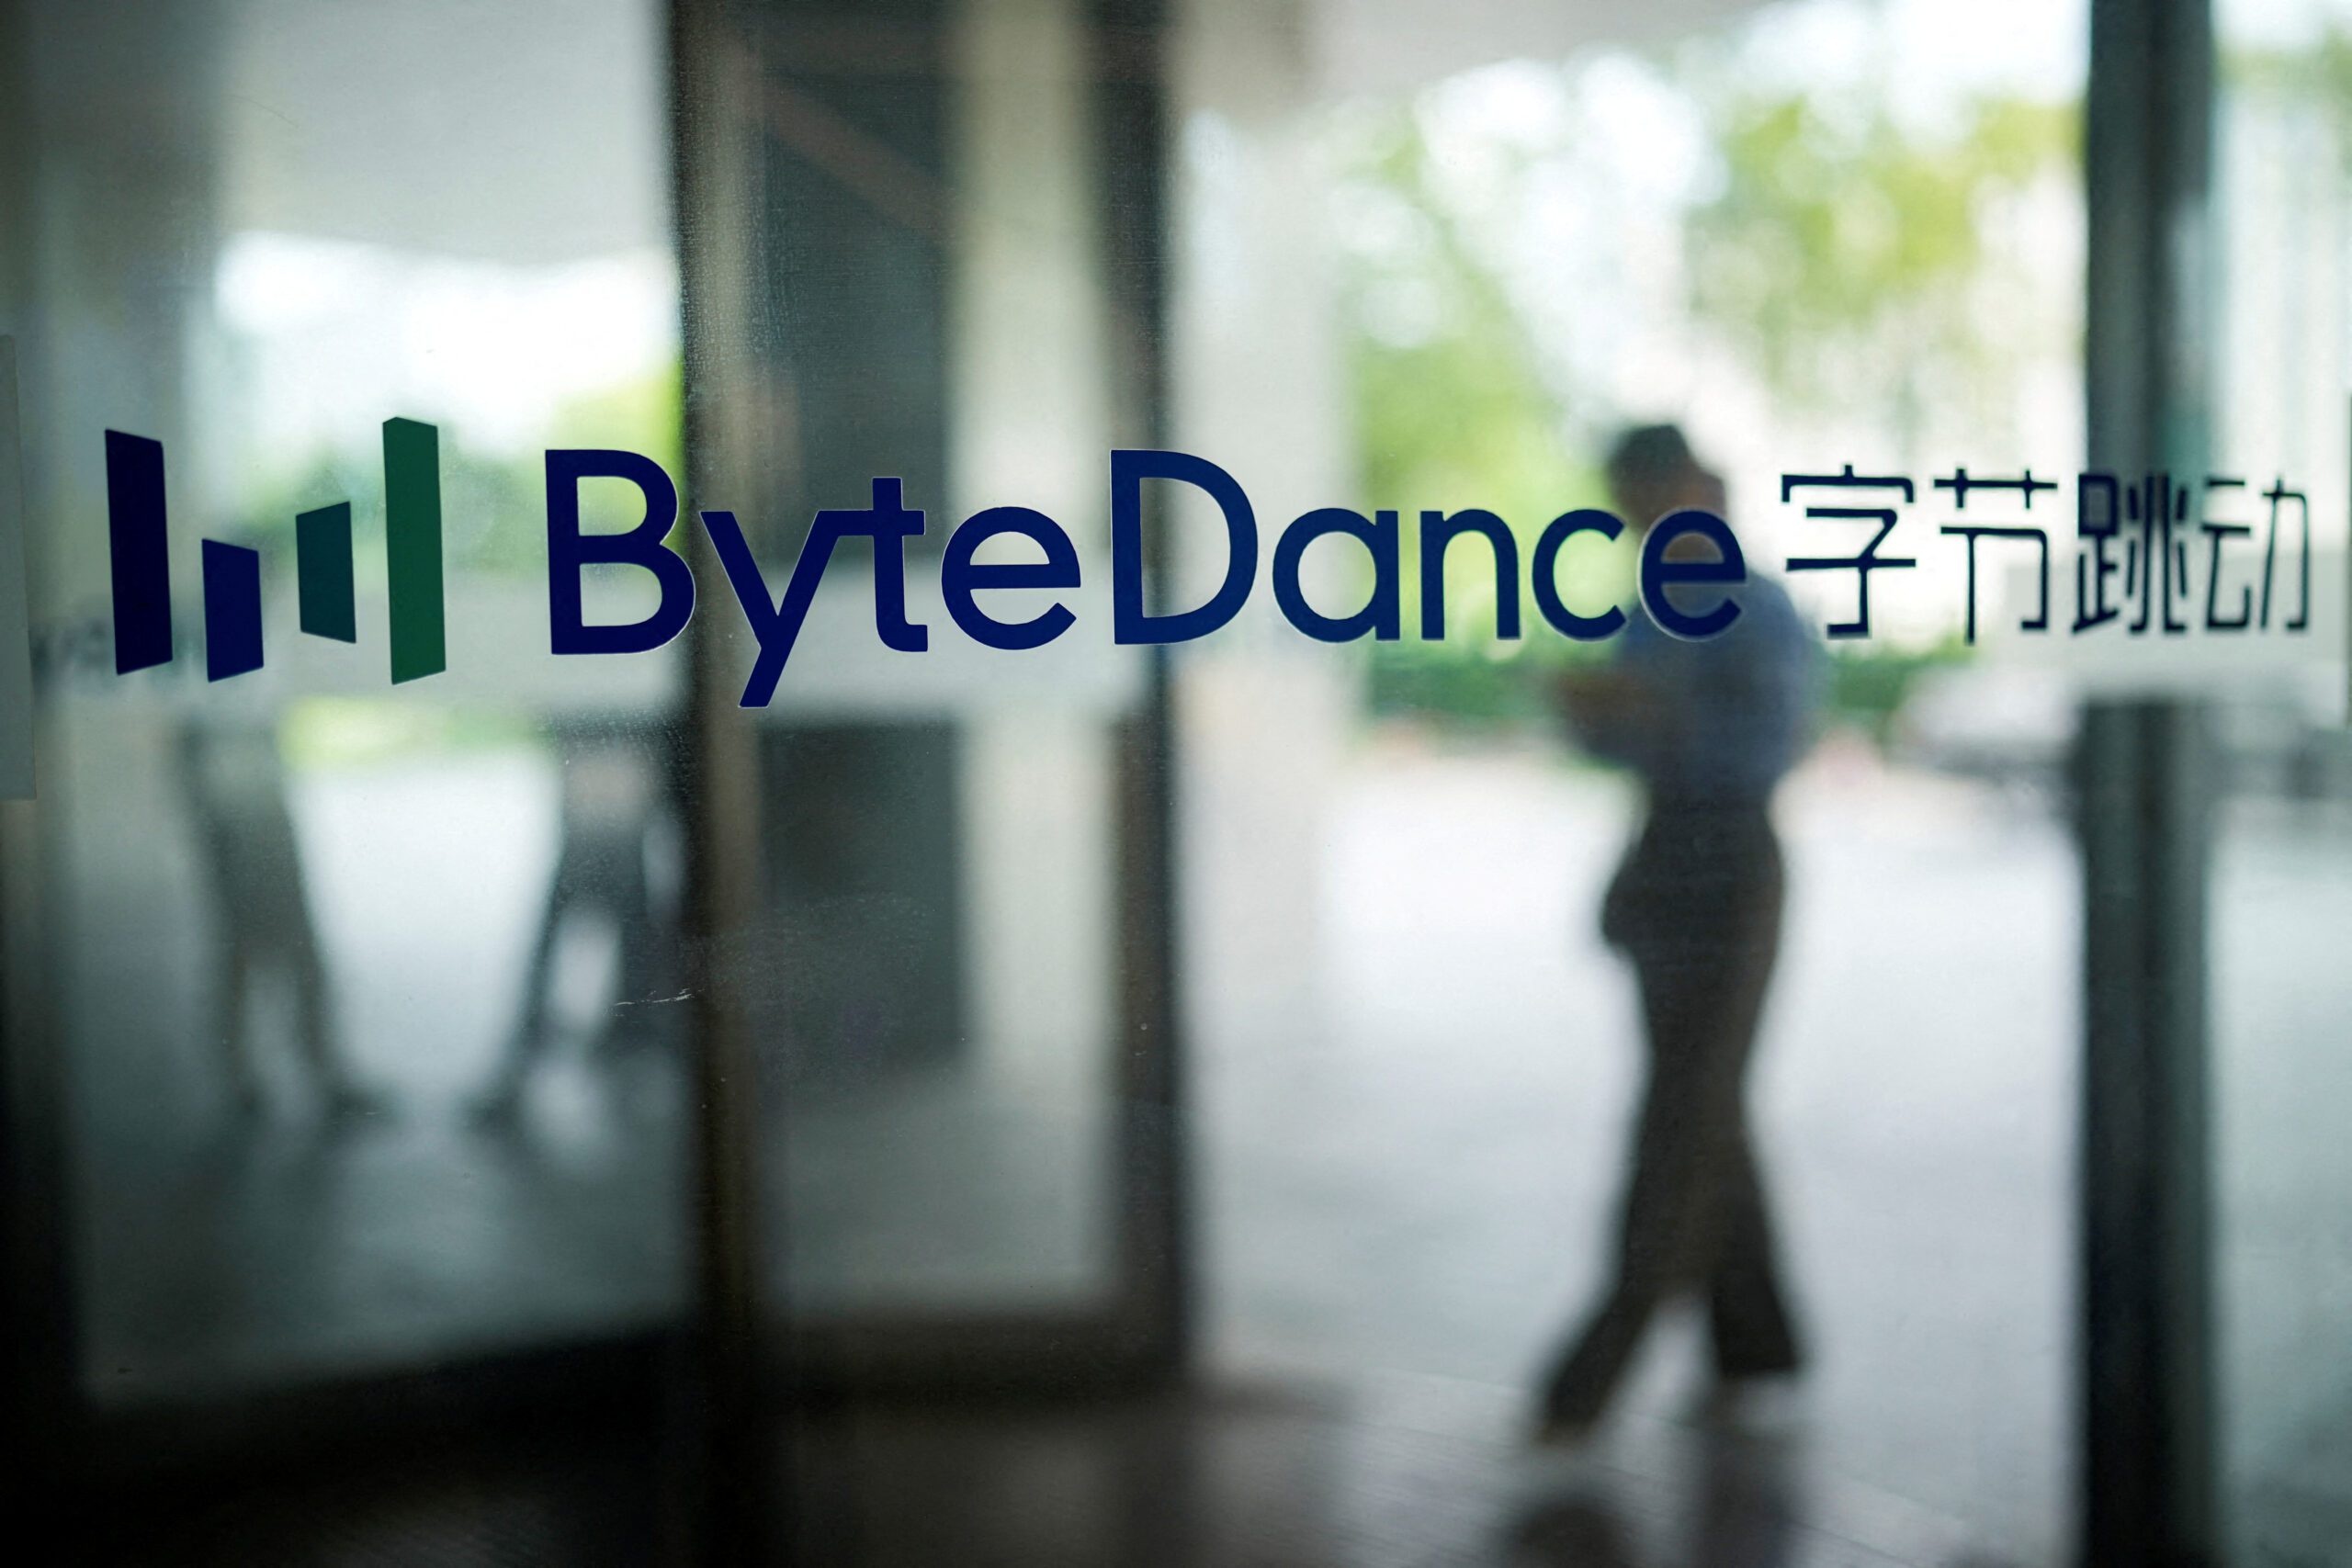 ByteDance chief warns against complacency, mediocrity as AI brings disruption